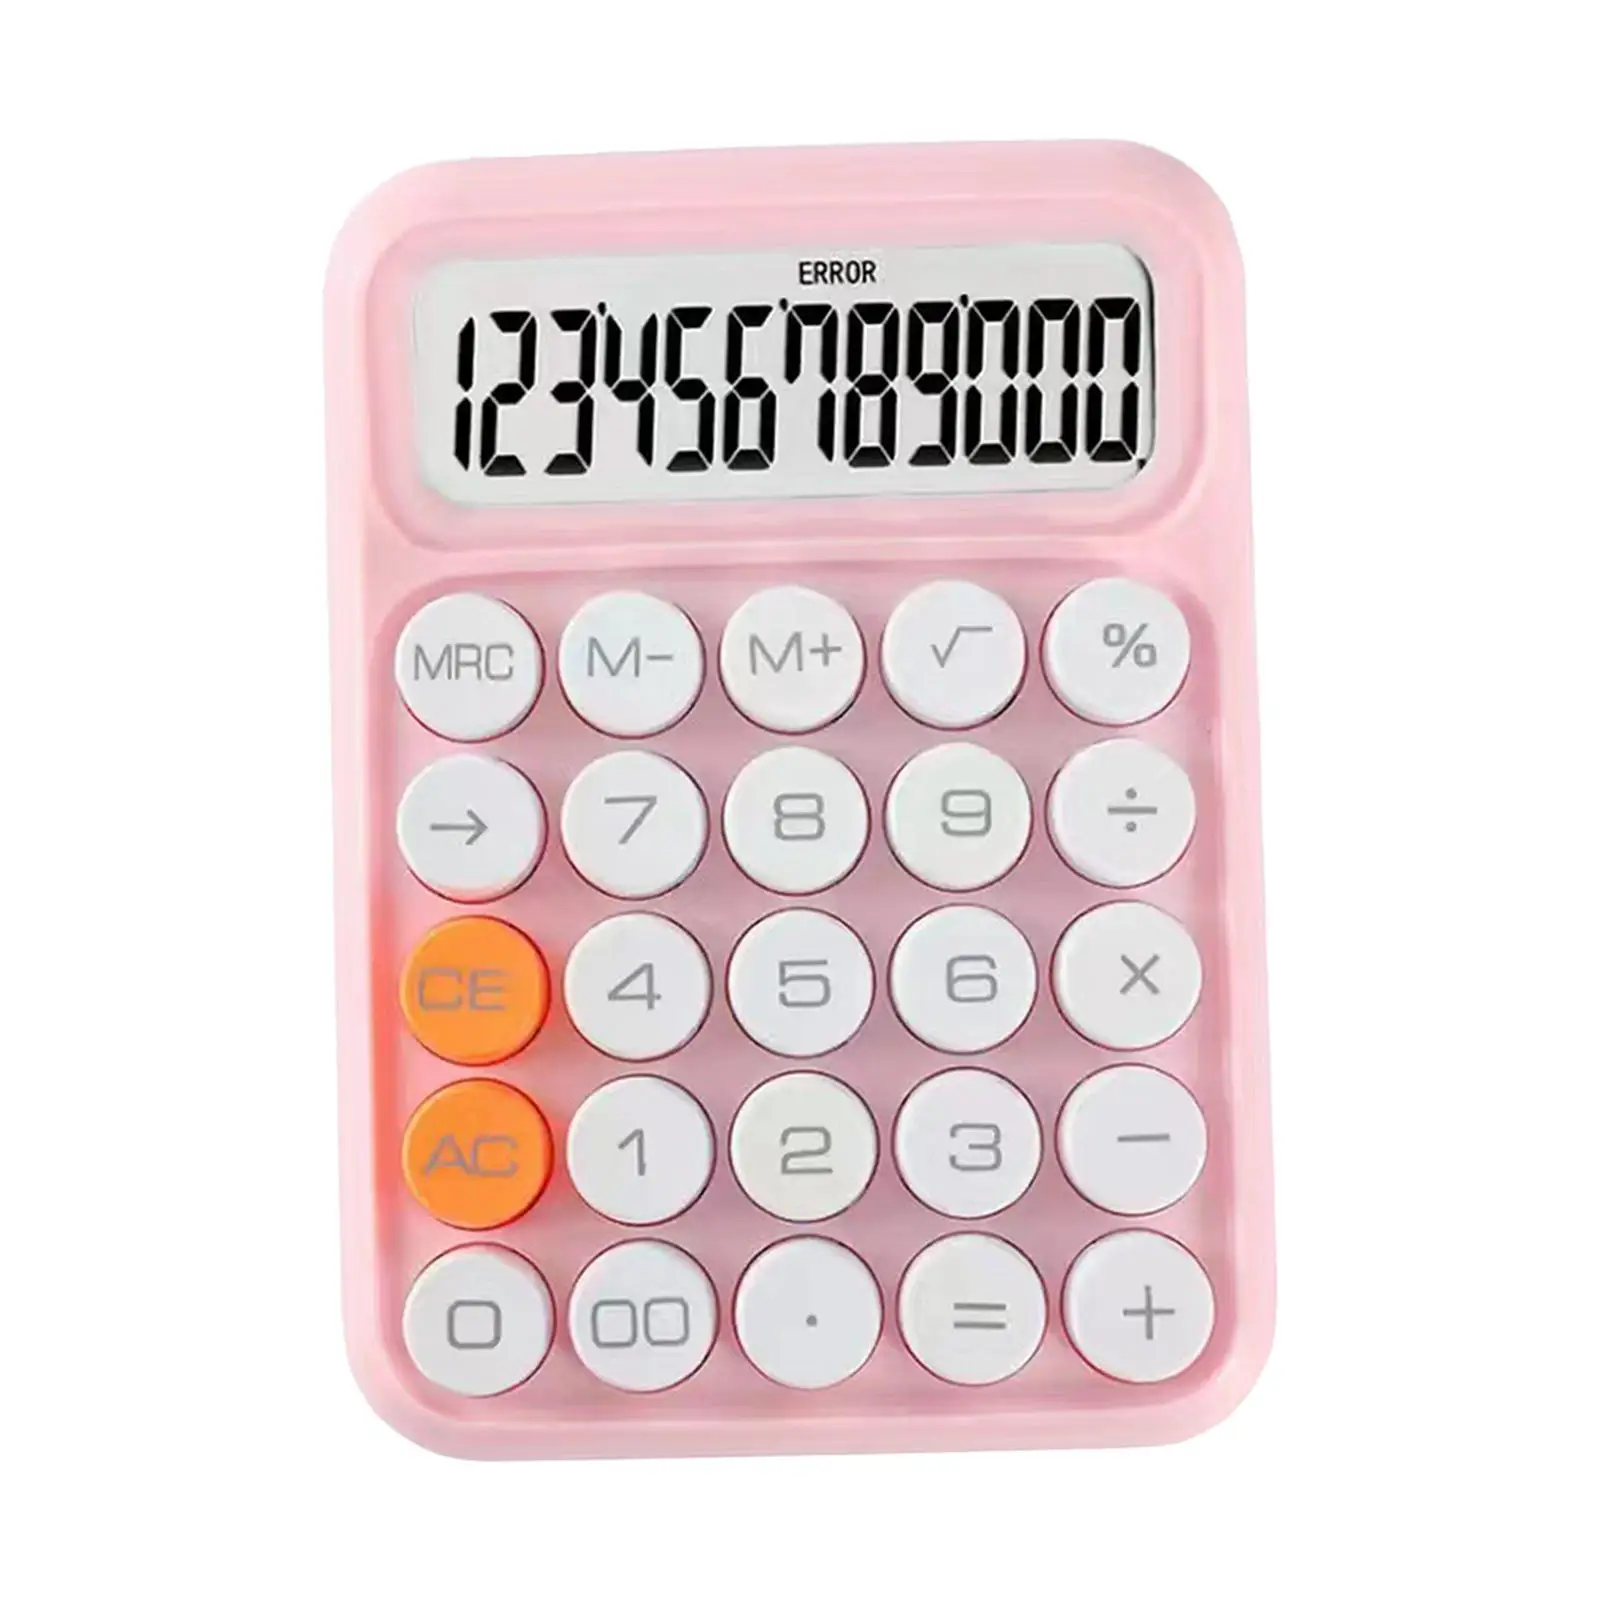 12 Digit Calculator Portable Large Display Cute Multifunctional Pocket Basic Calculator for Travel Daily Use Home Business Use